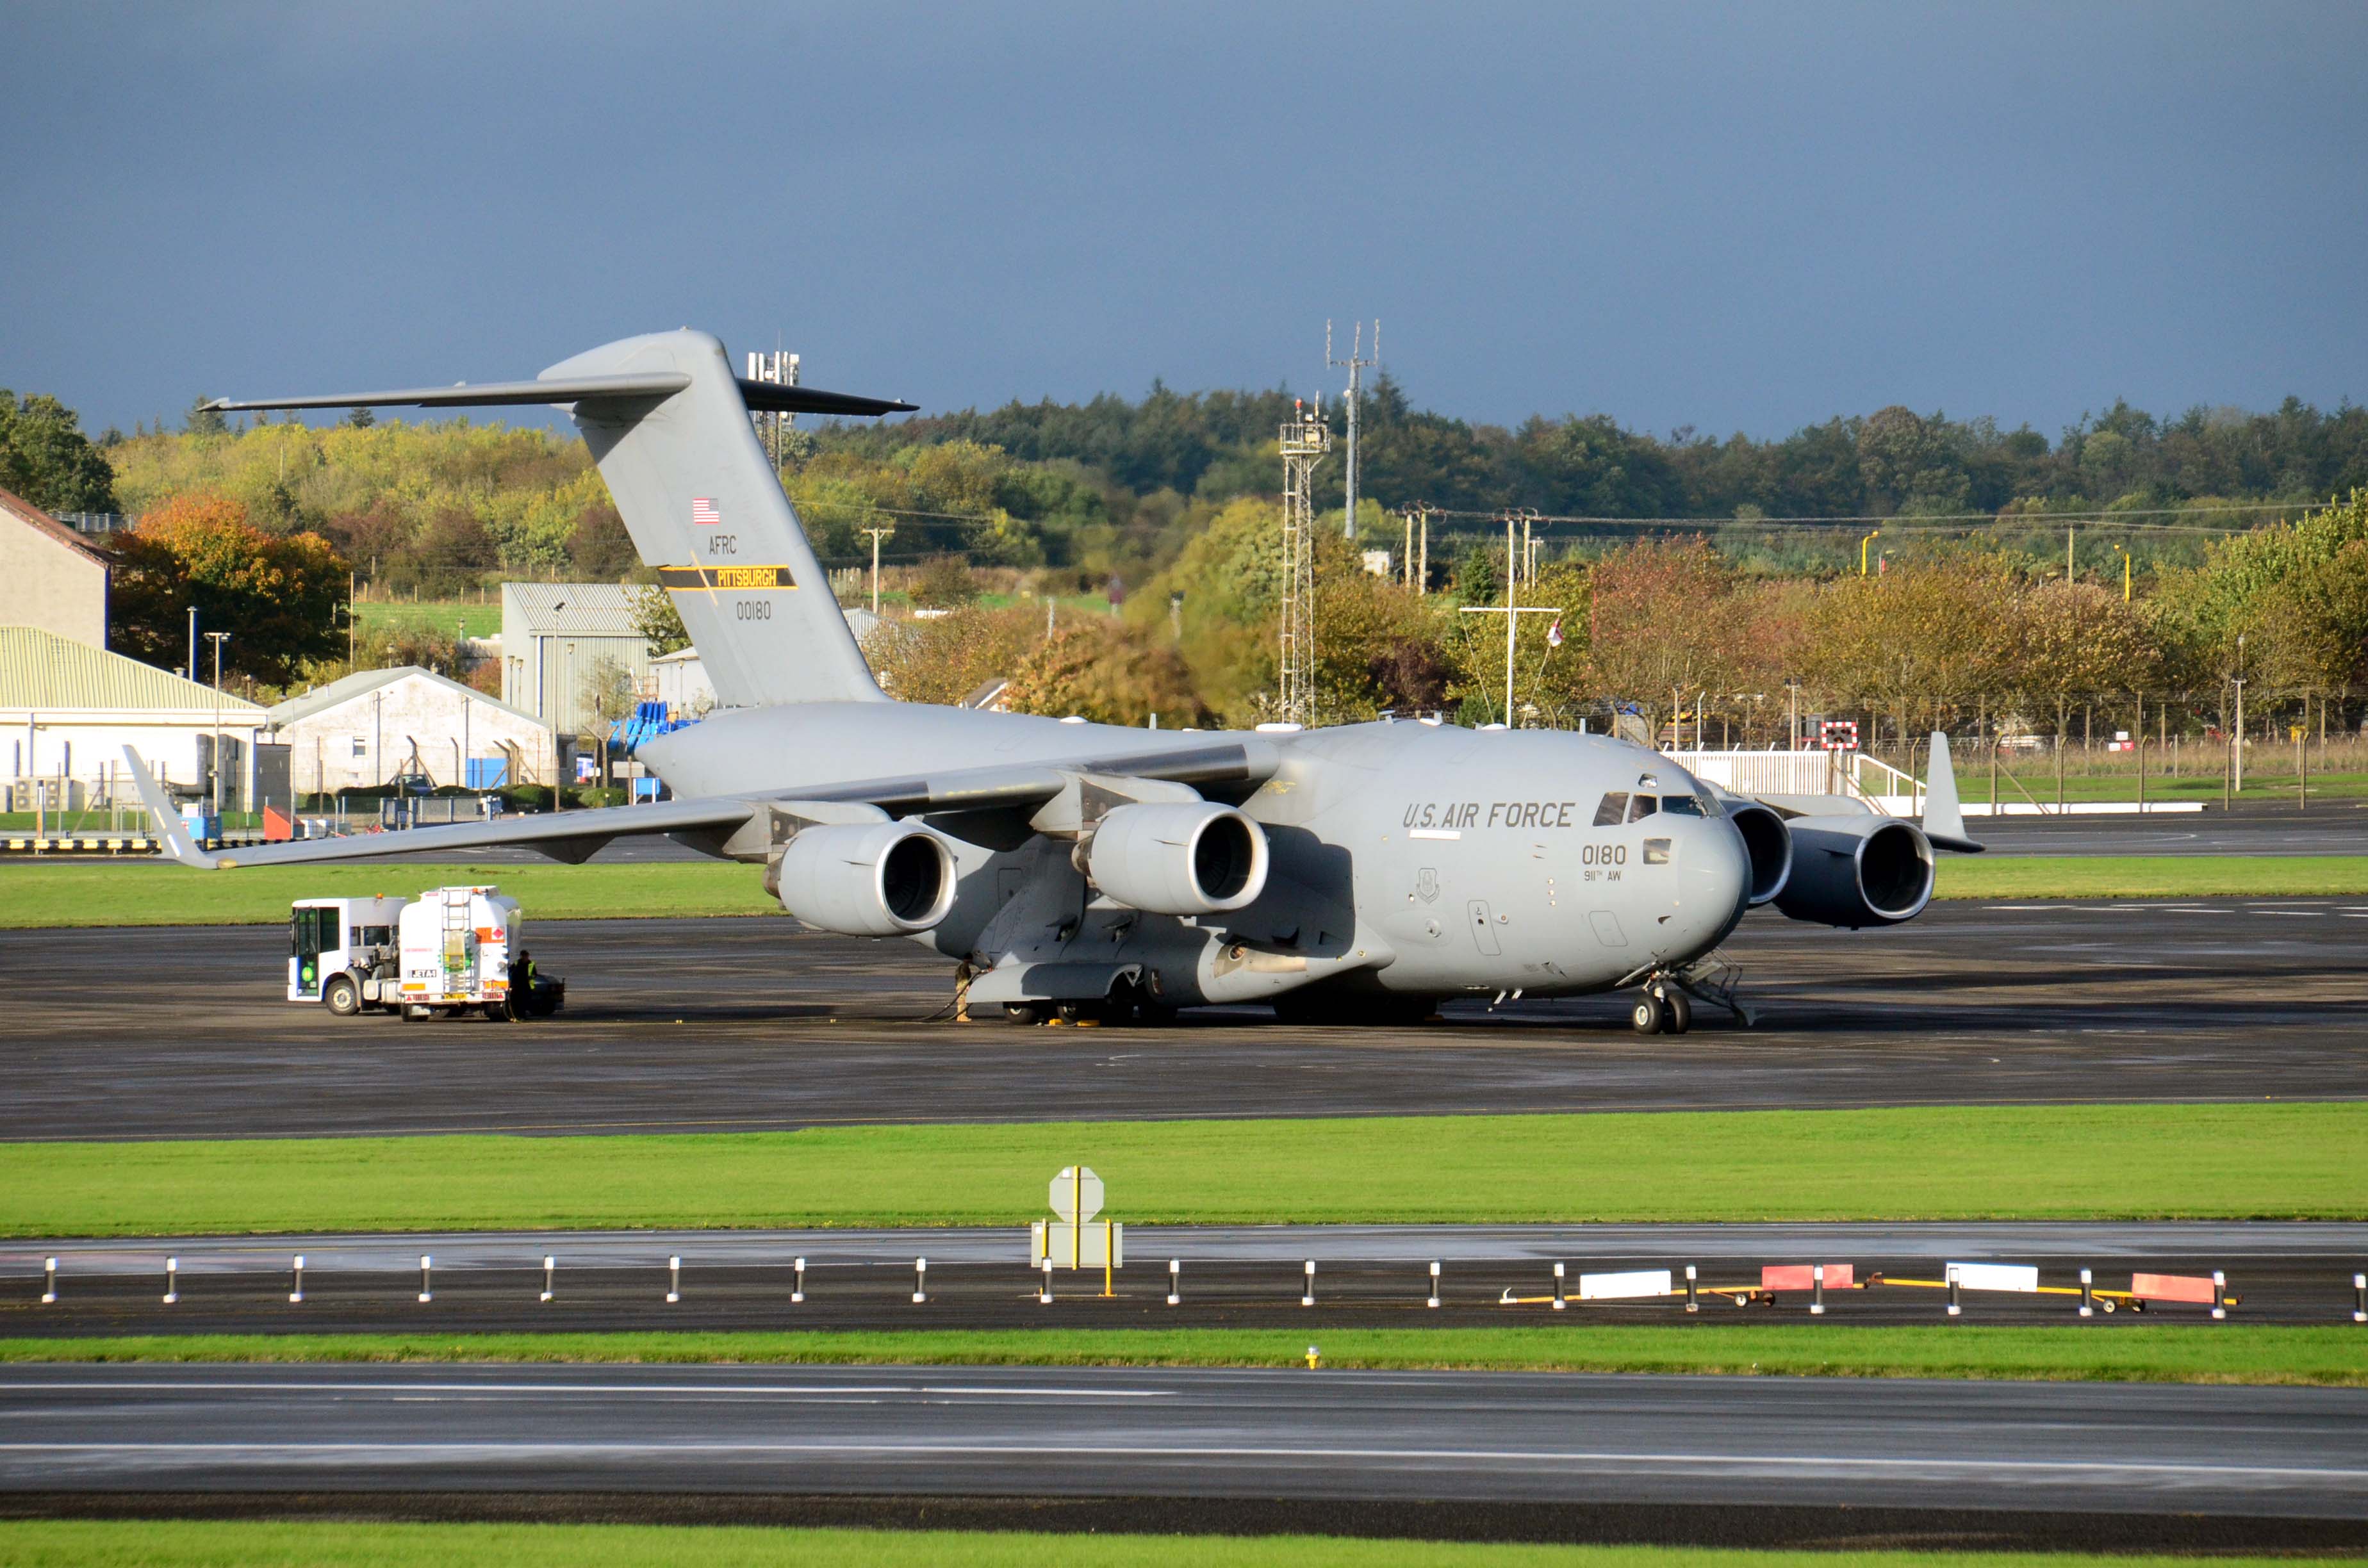 00-0180/000180 USAF - United States Air Force Boeing C-17A Globemaster III Photo by FlyDroo - AVSpotters.com